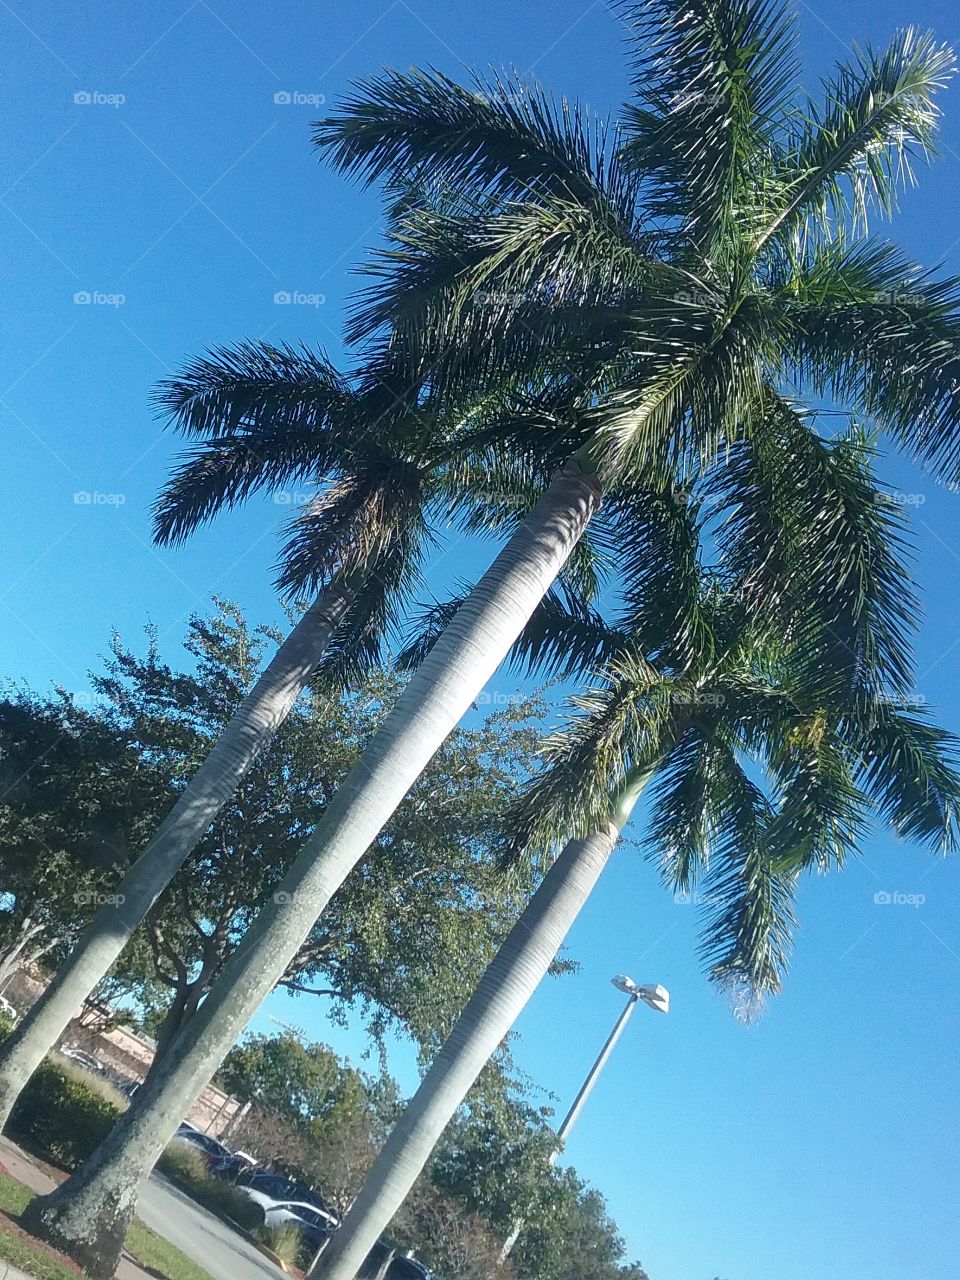 giant palm trees